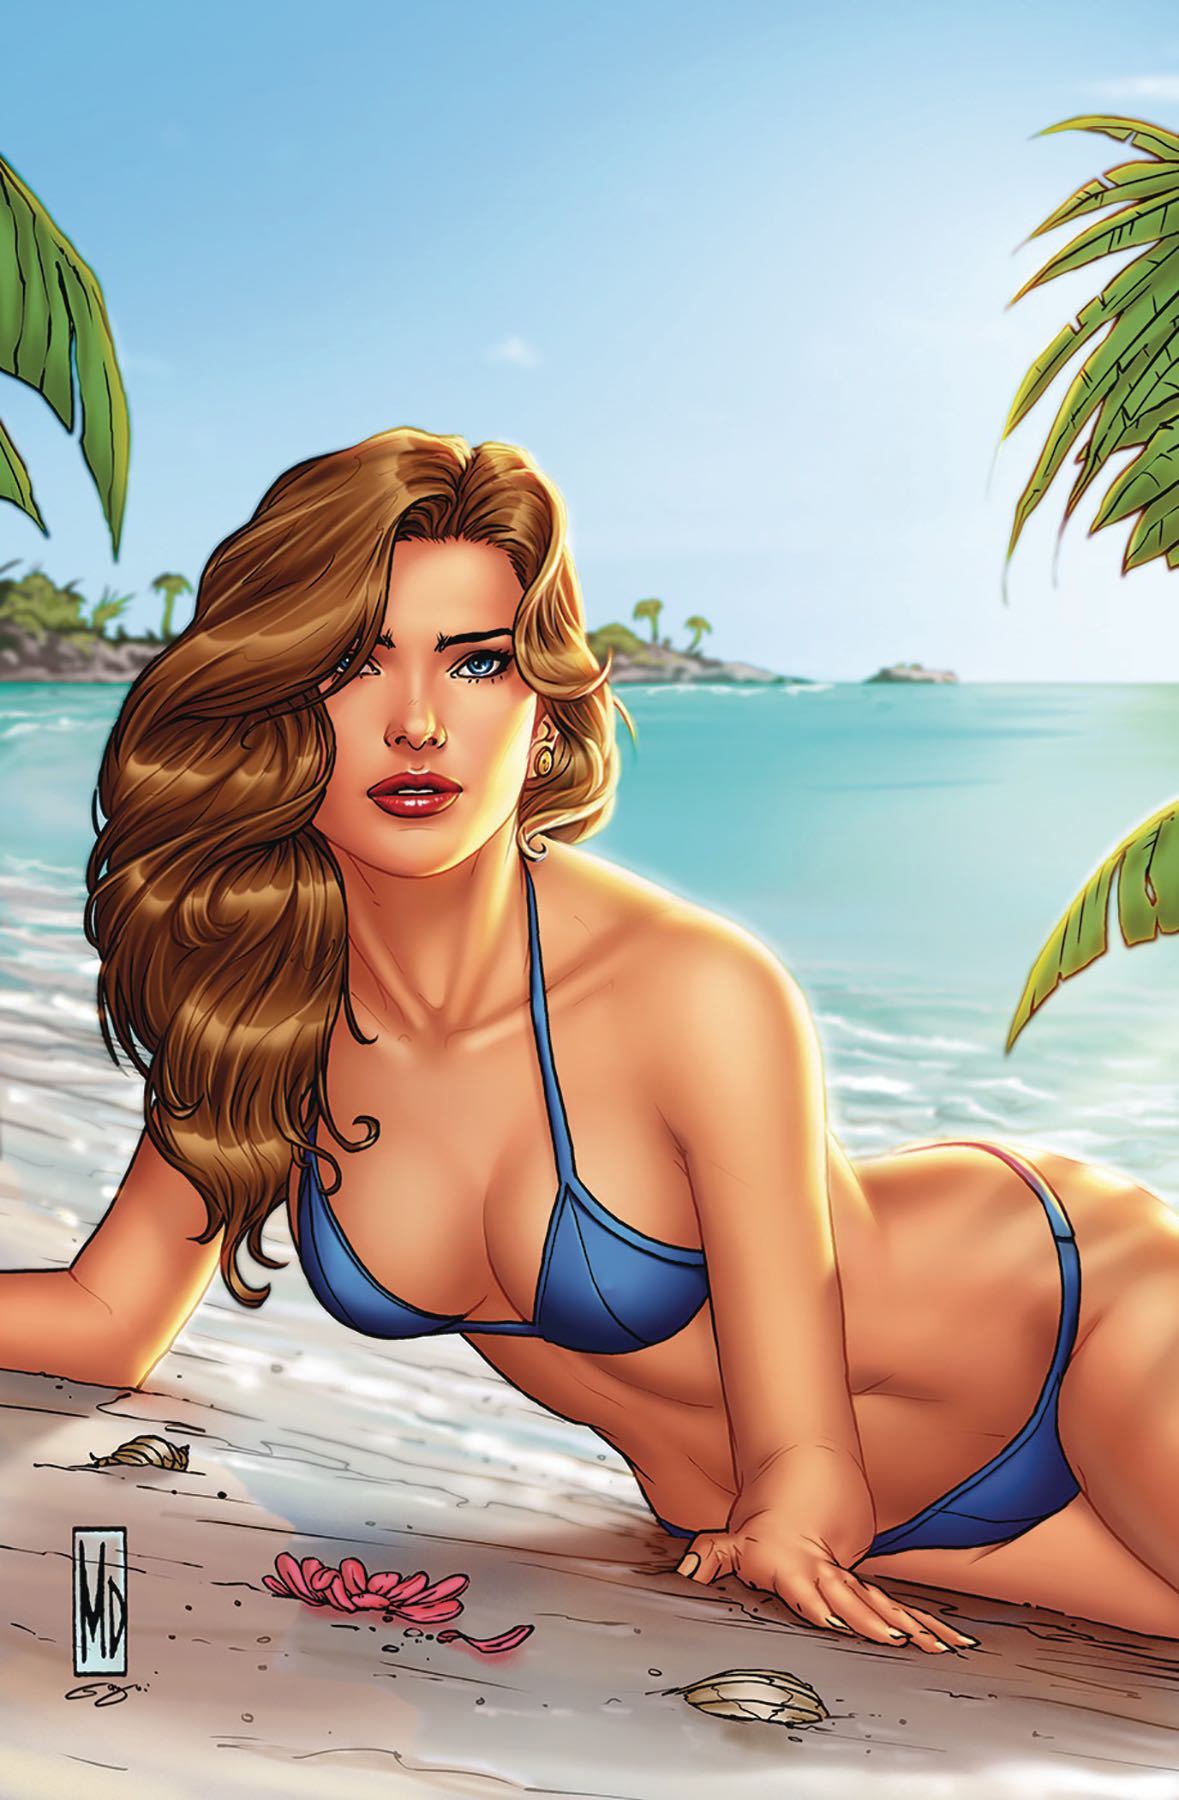 Grimm Fairy Tales Presents Swimsuit Edition 2019 #1 ...